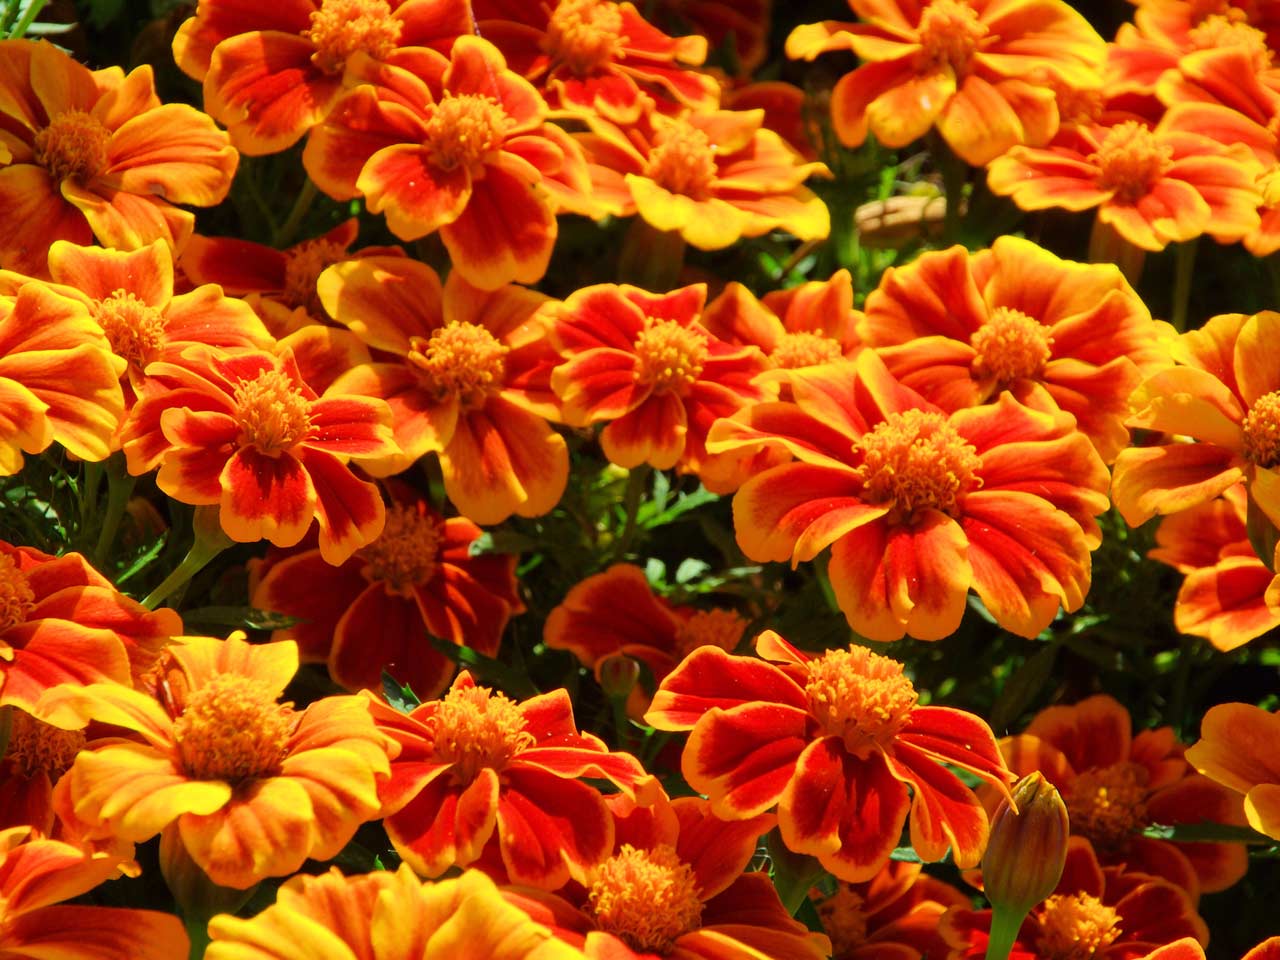 African marigolds, or tagetes